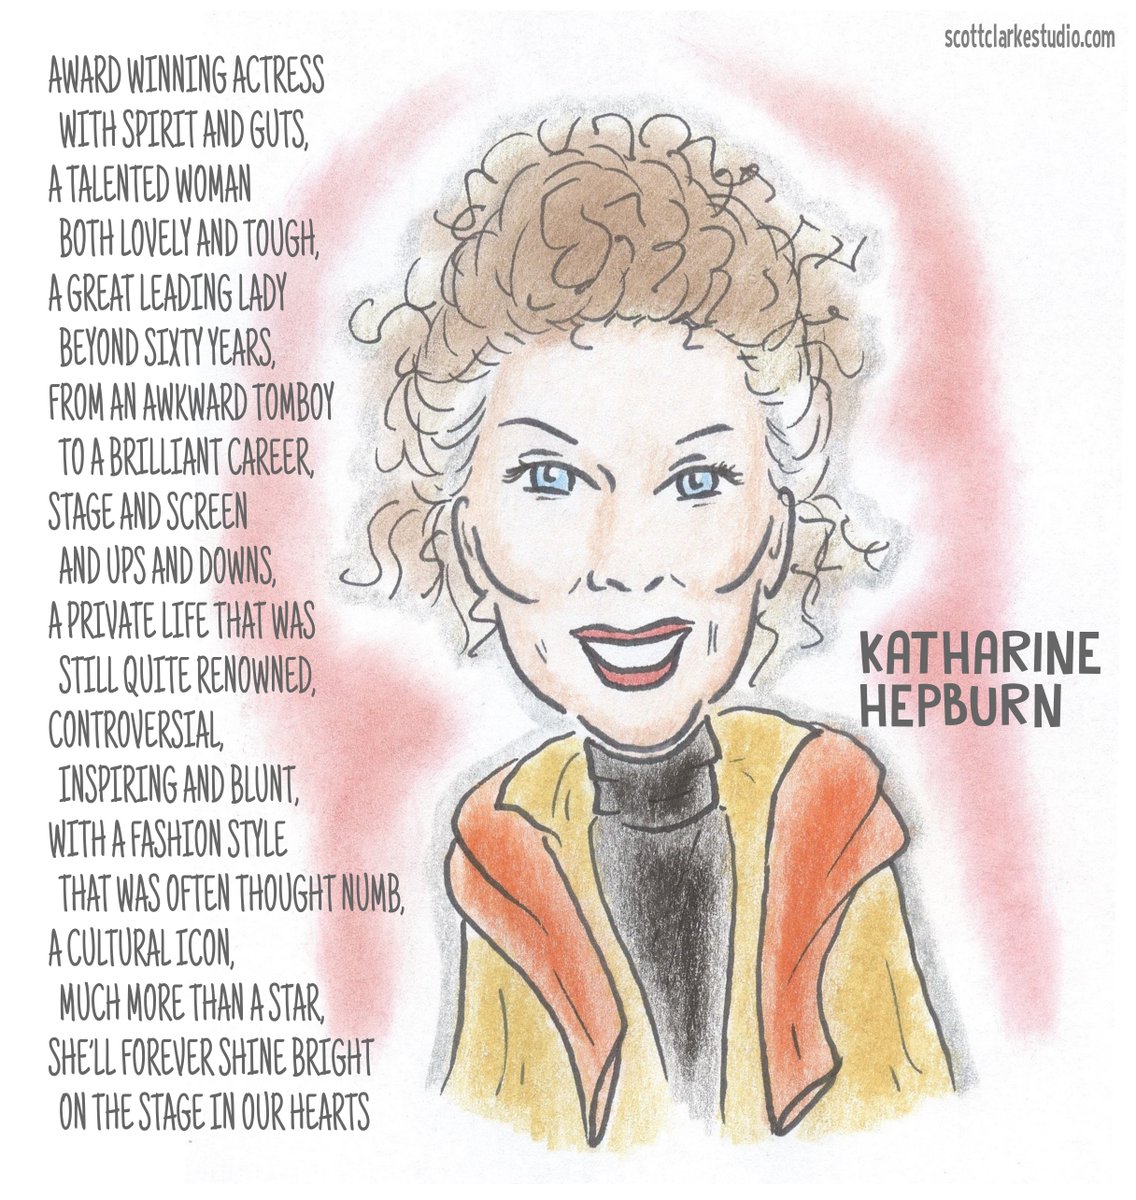 Remembering #katherinehepburn on her birthday today, May 12. Iconic in both career and persona. <3